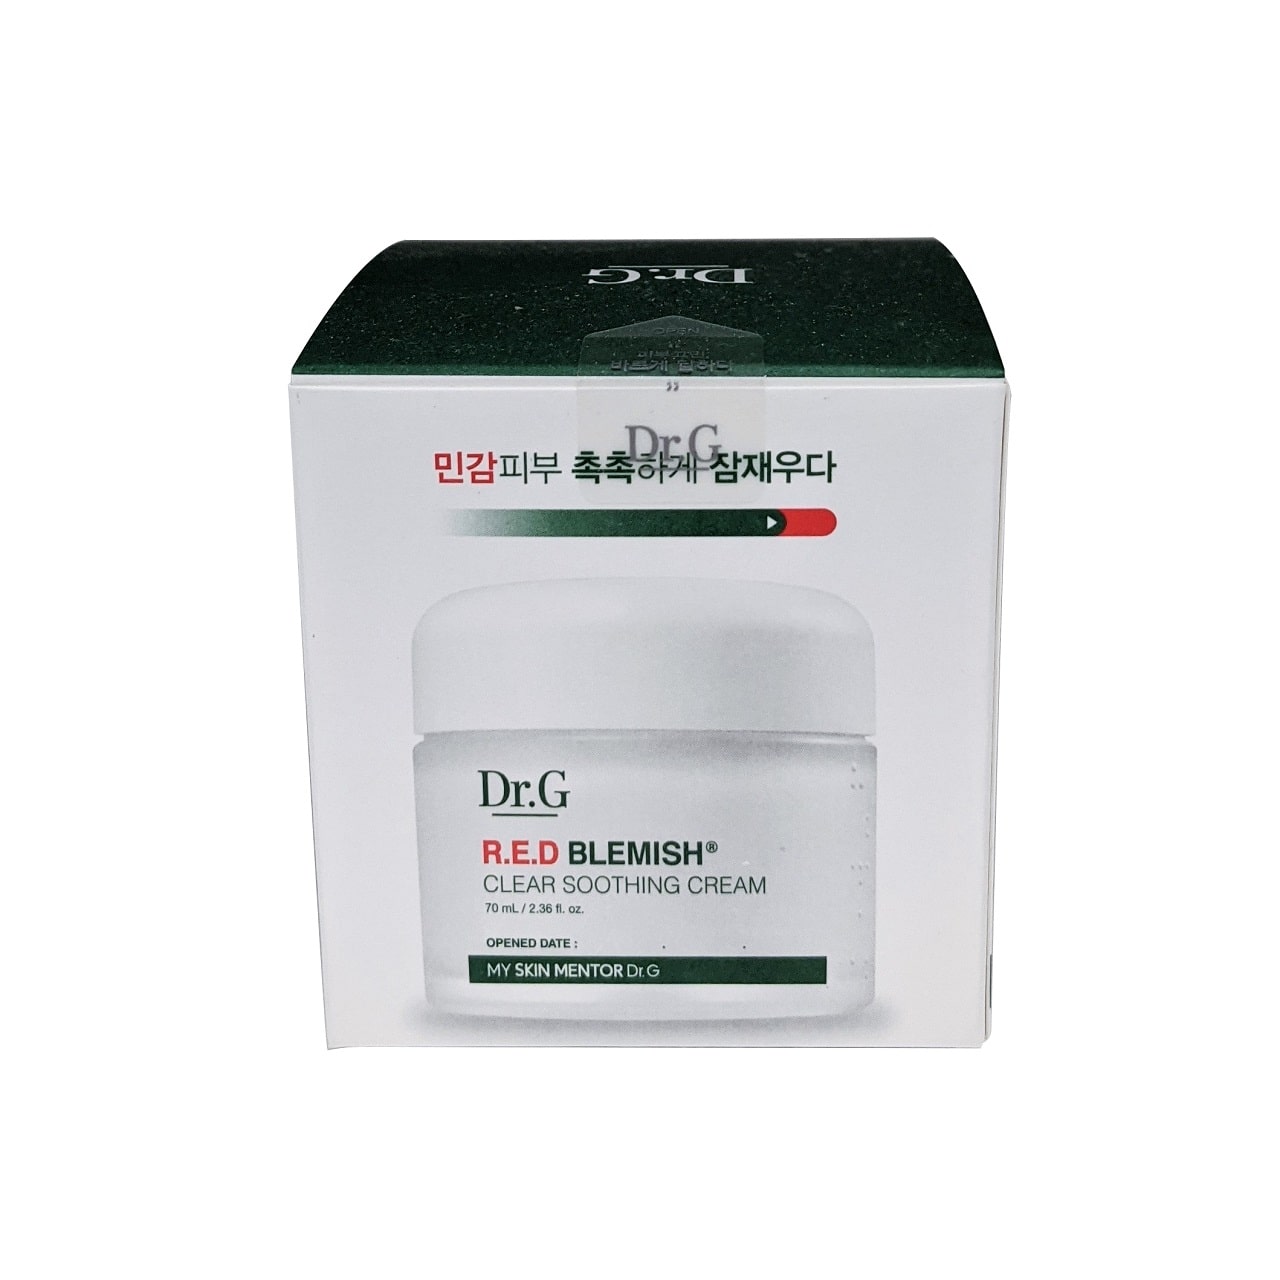 Picture of jar for Dr.G R.E.D Blemish Clear Soothing Cream